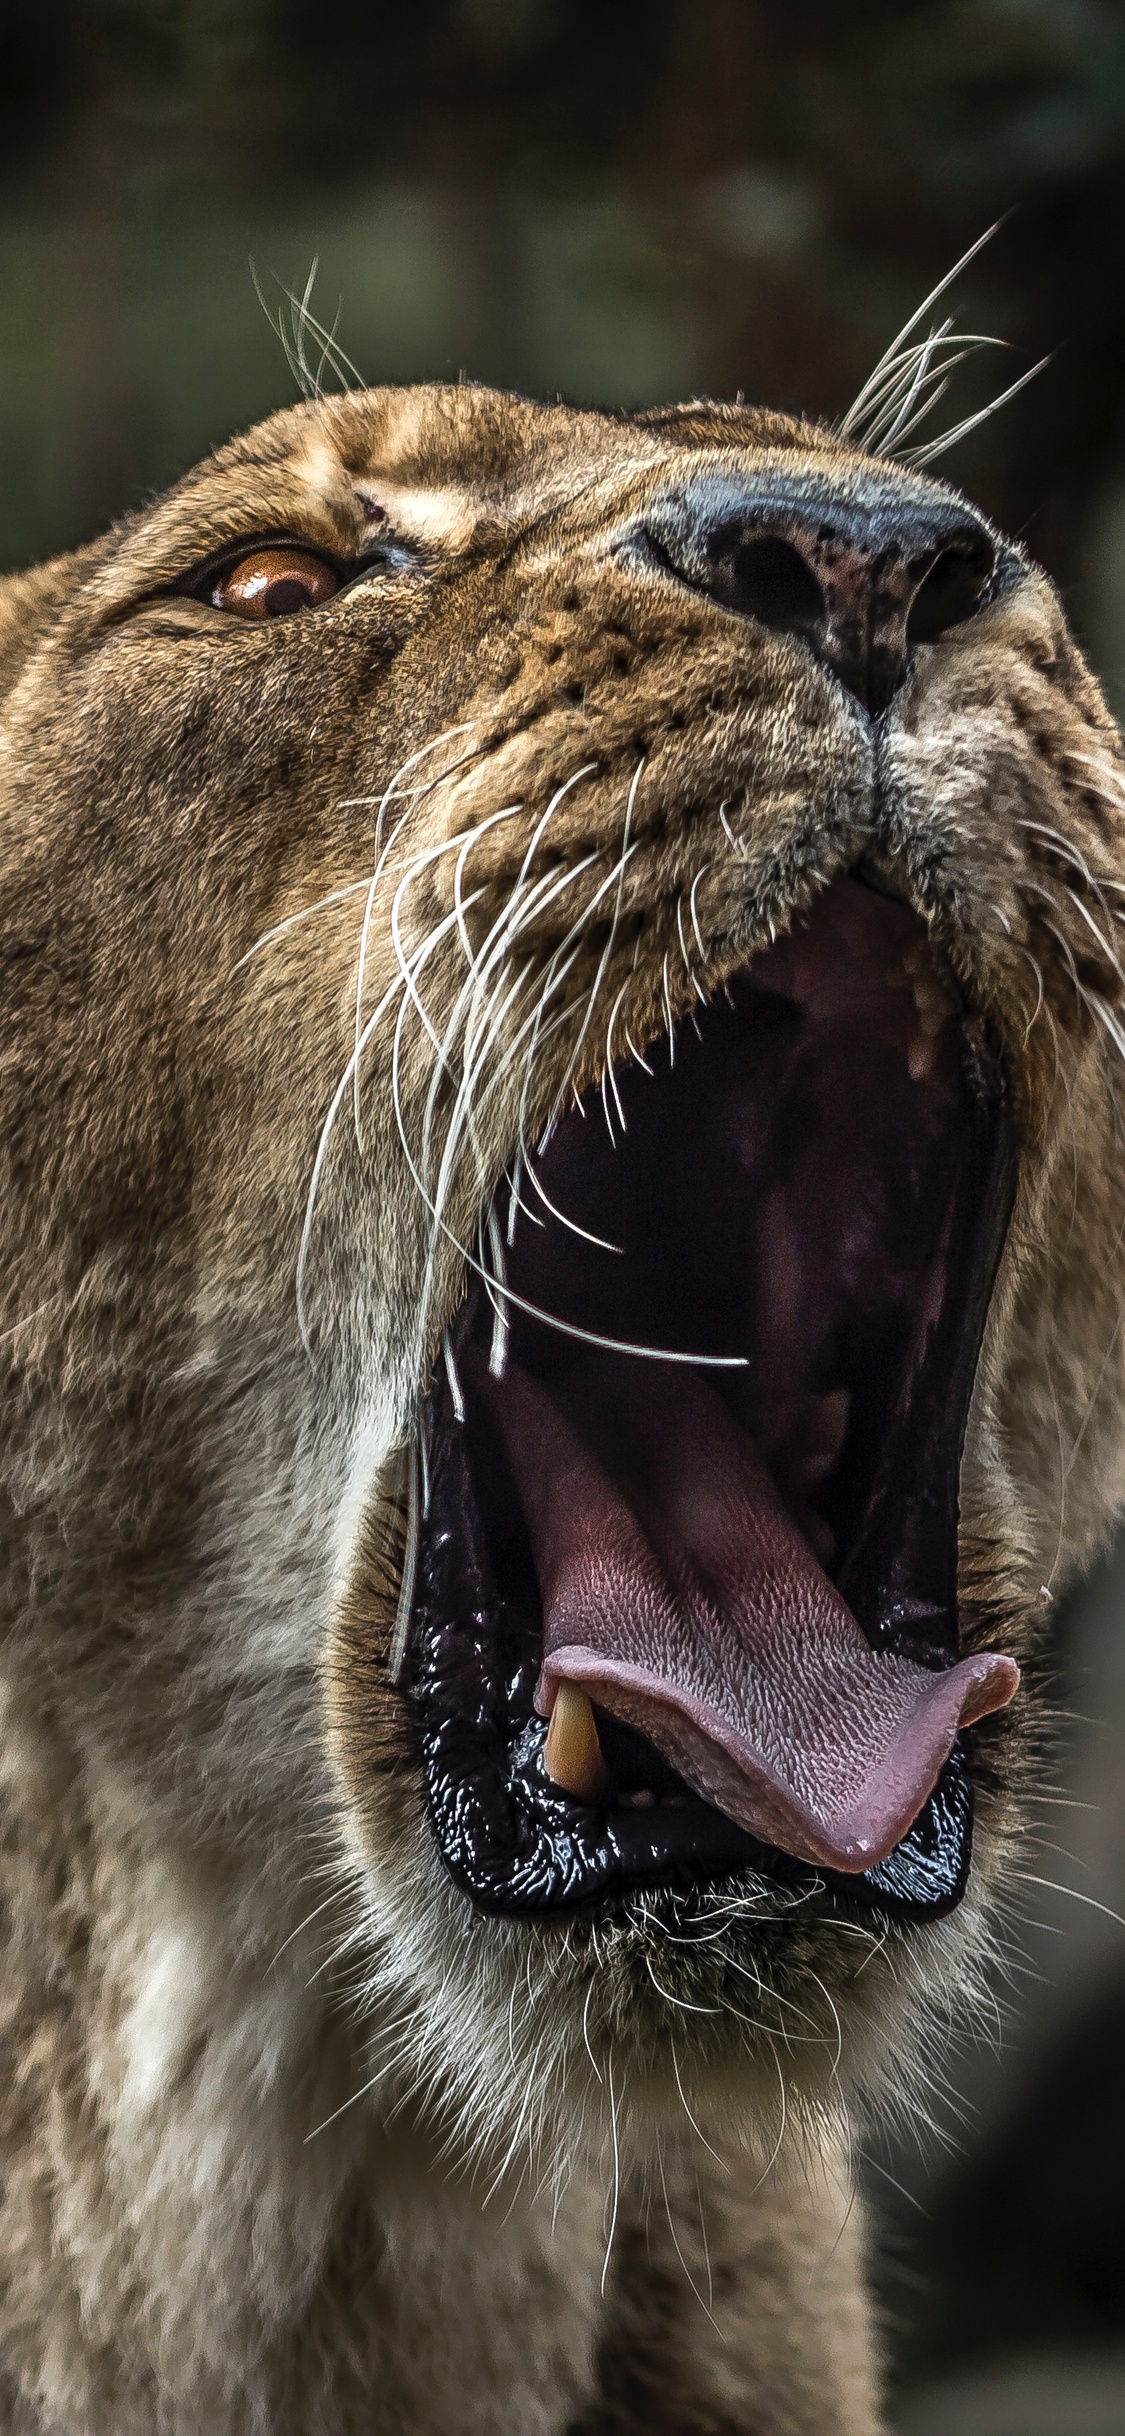 Lion With Open Mouth 5k iPhone XS, iPhone iPhone X HD 4k Wallpaper, Image, Background, Photo and Picture